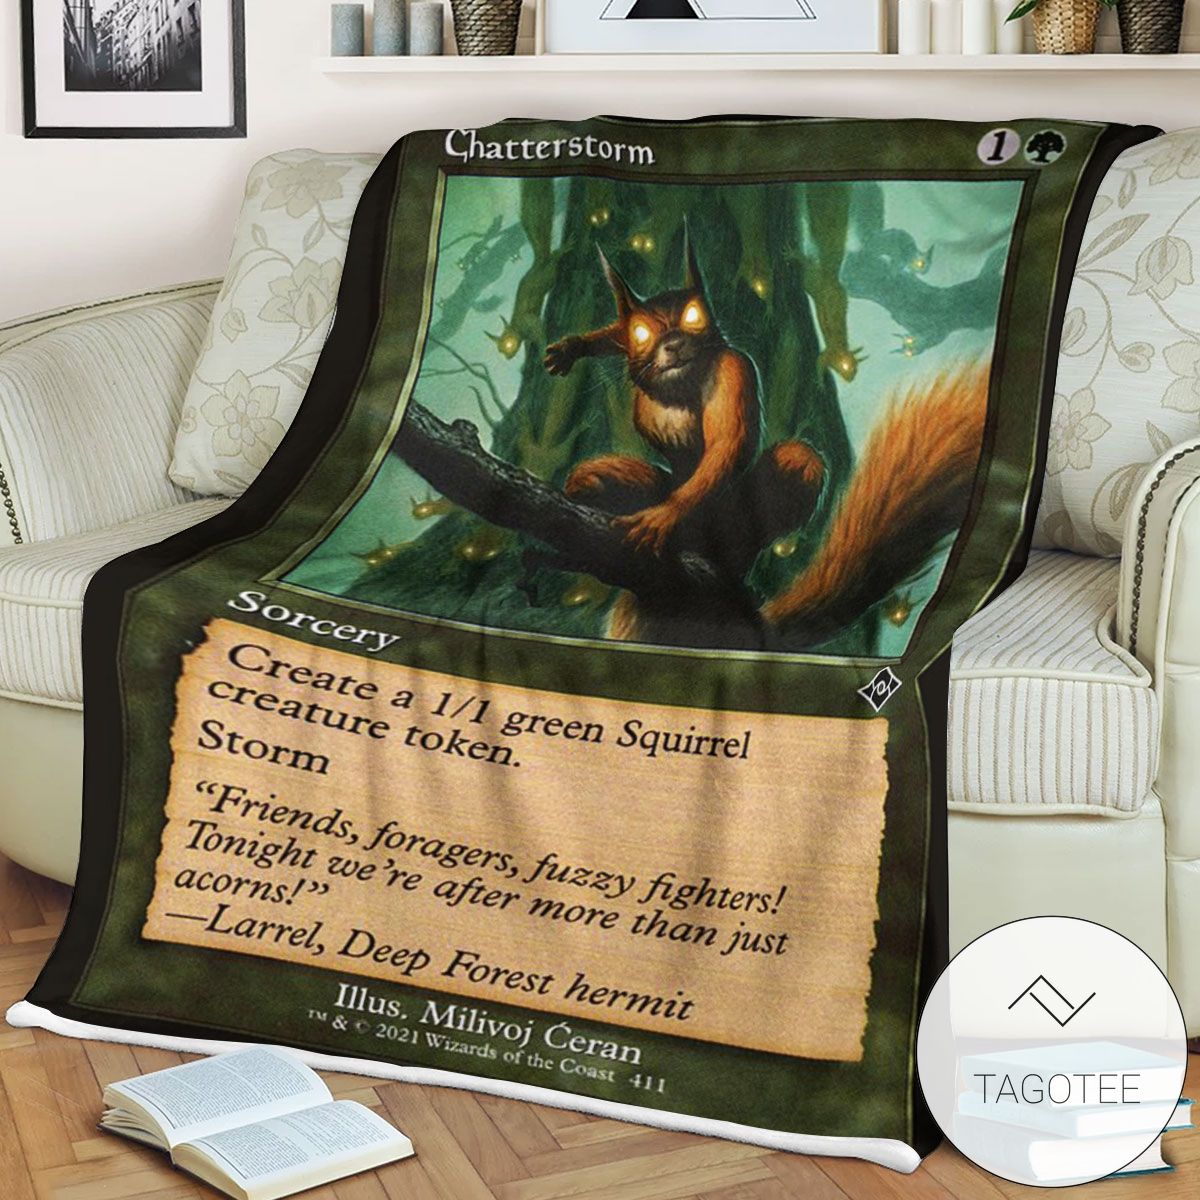 Mh2 411 Chatterstorm MTG Game Magic The Gathering Blanket